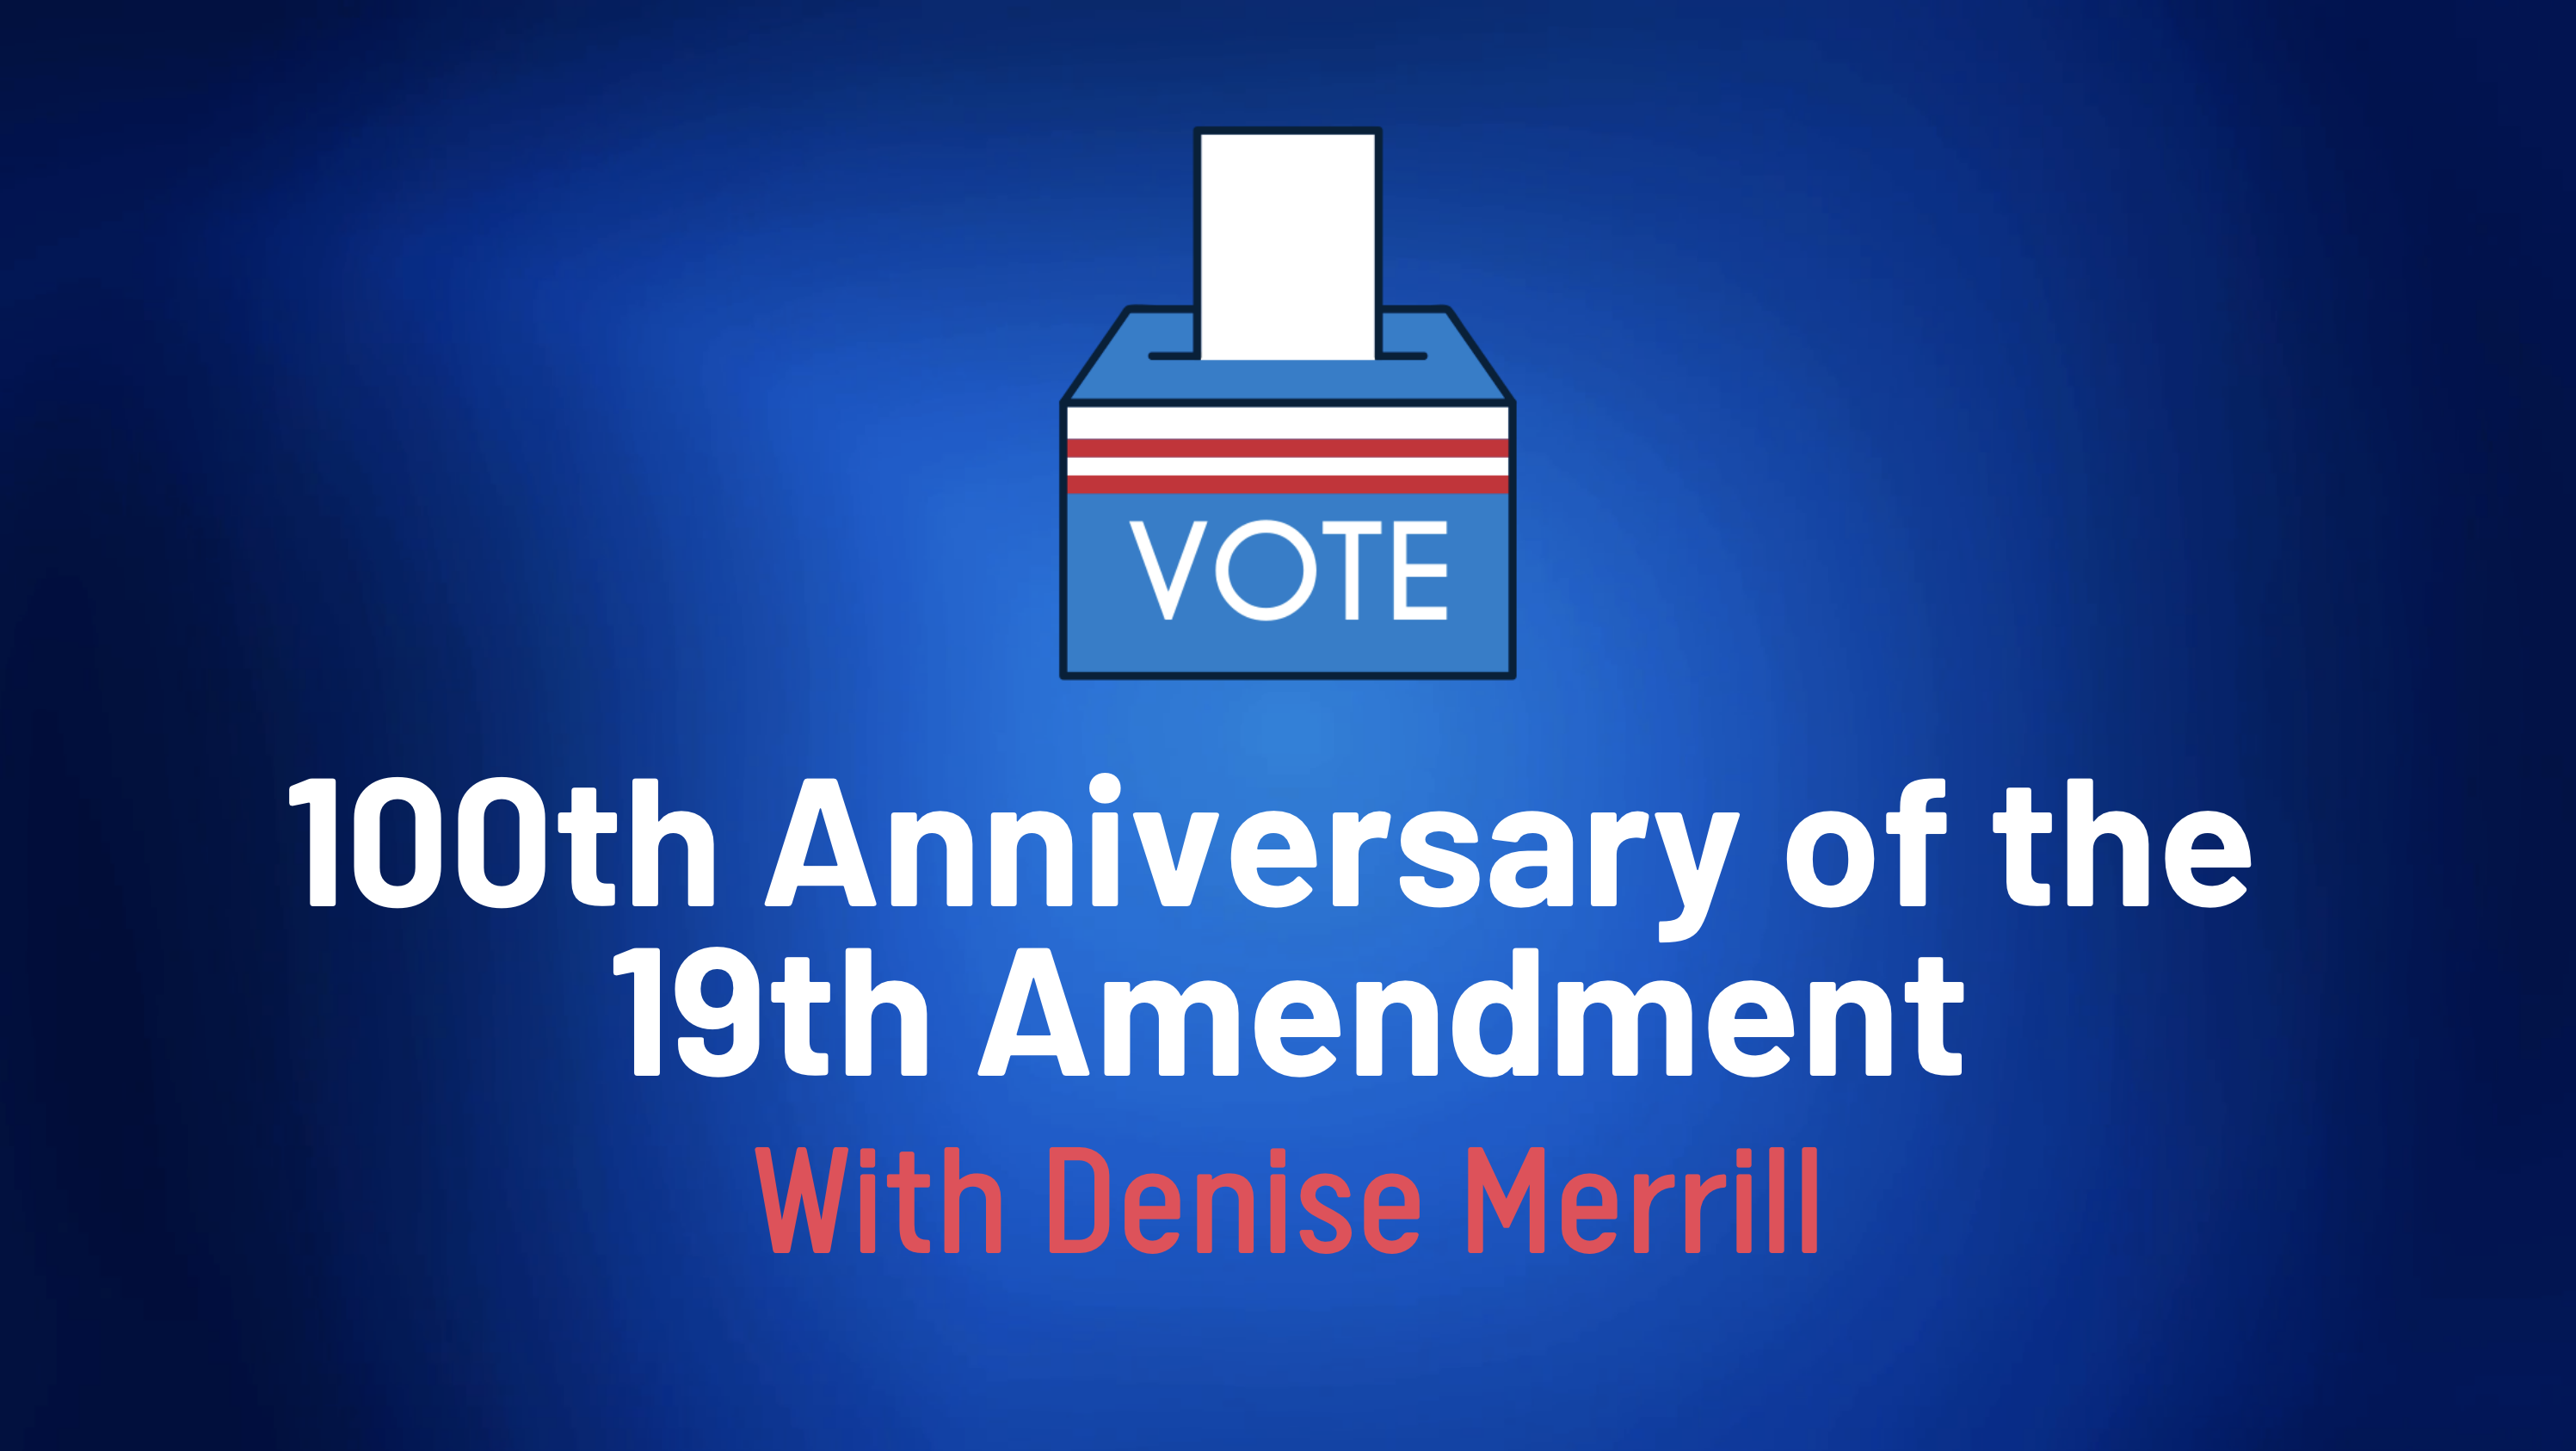 100th Anniversary of the Passage of the 19th Amendment